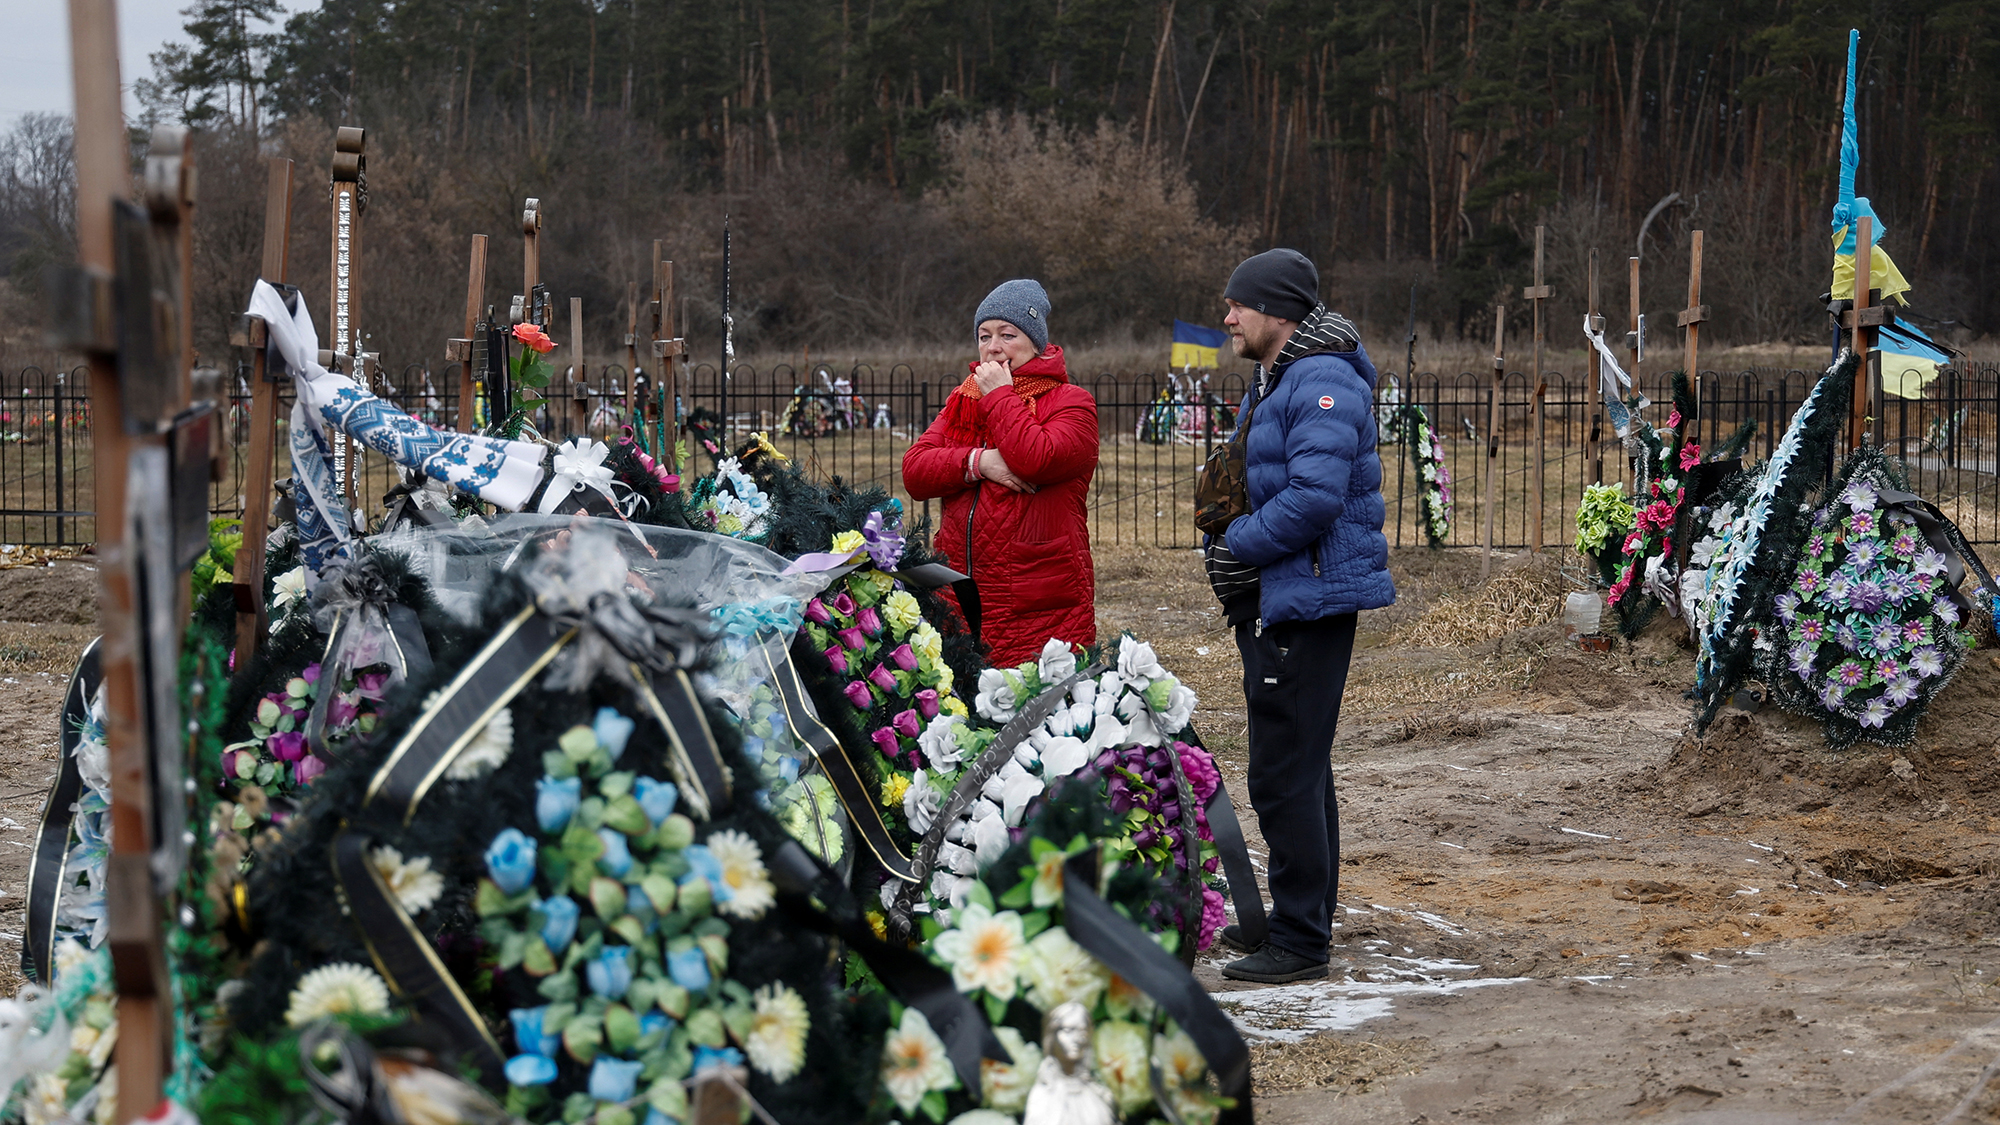 Wife Natalia and son Artem stand next to the grave of Vasyl Maznichenko, local resident killed by Russian soldiers during the occupation of Bucha, on the first anniversary of Russia's attack on Ukraine on Friday.